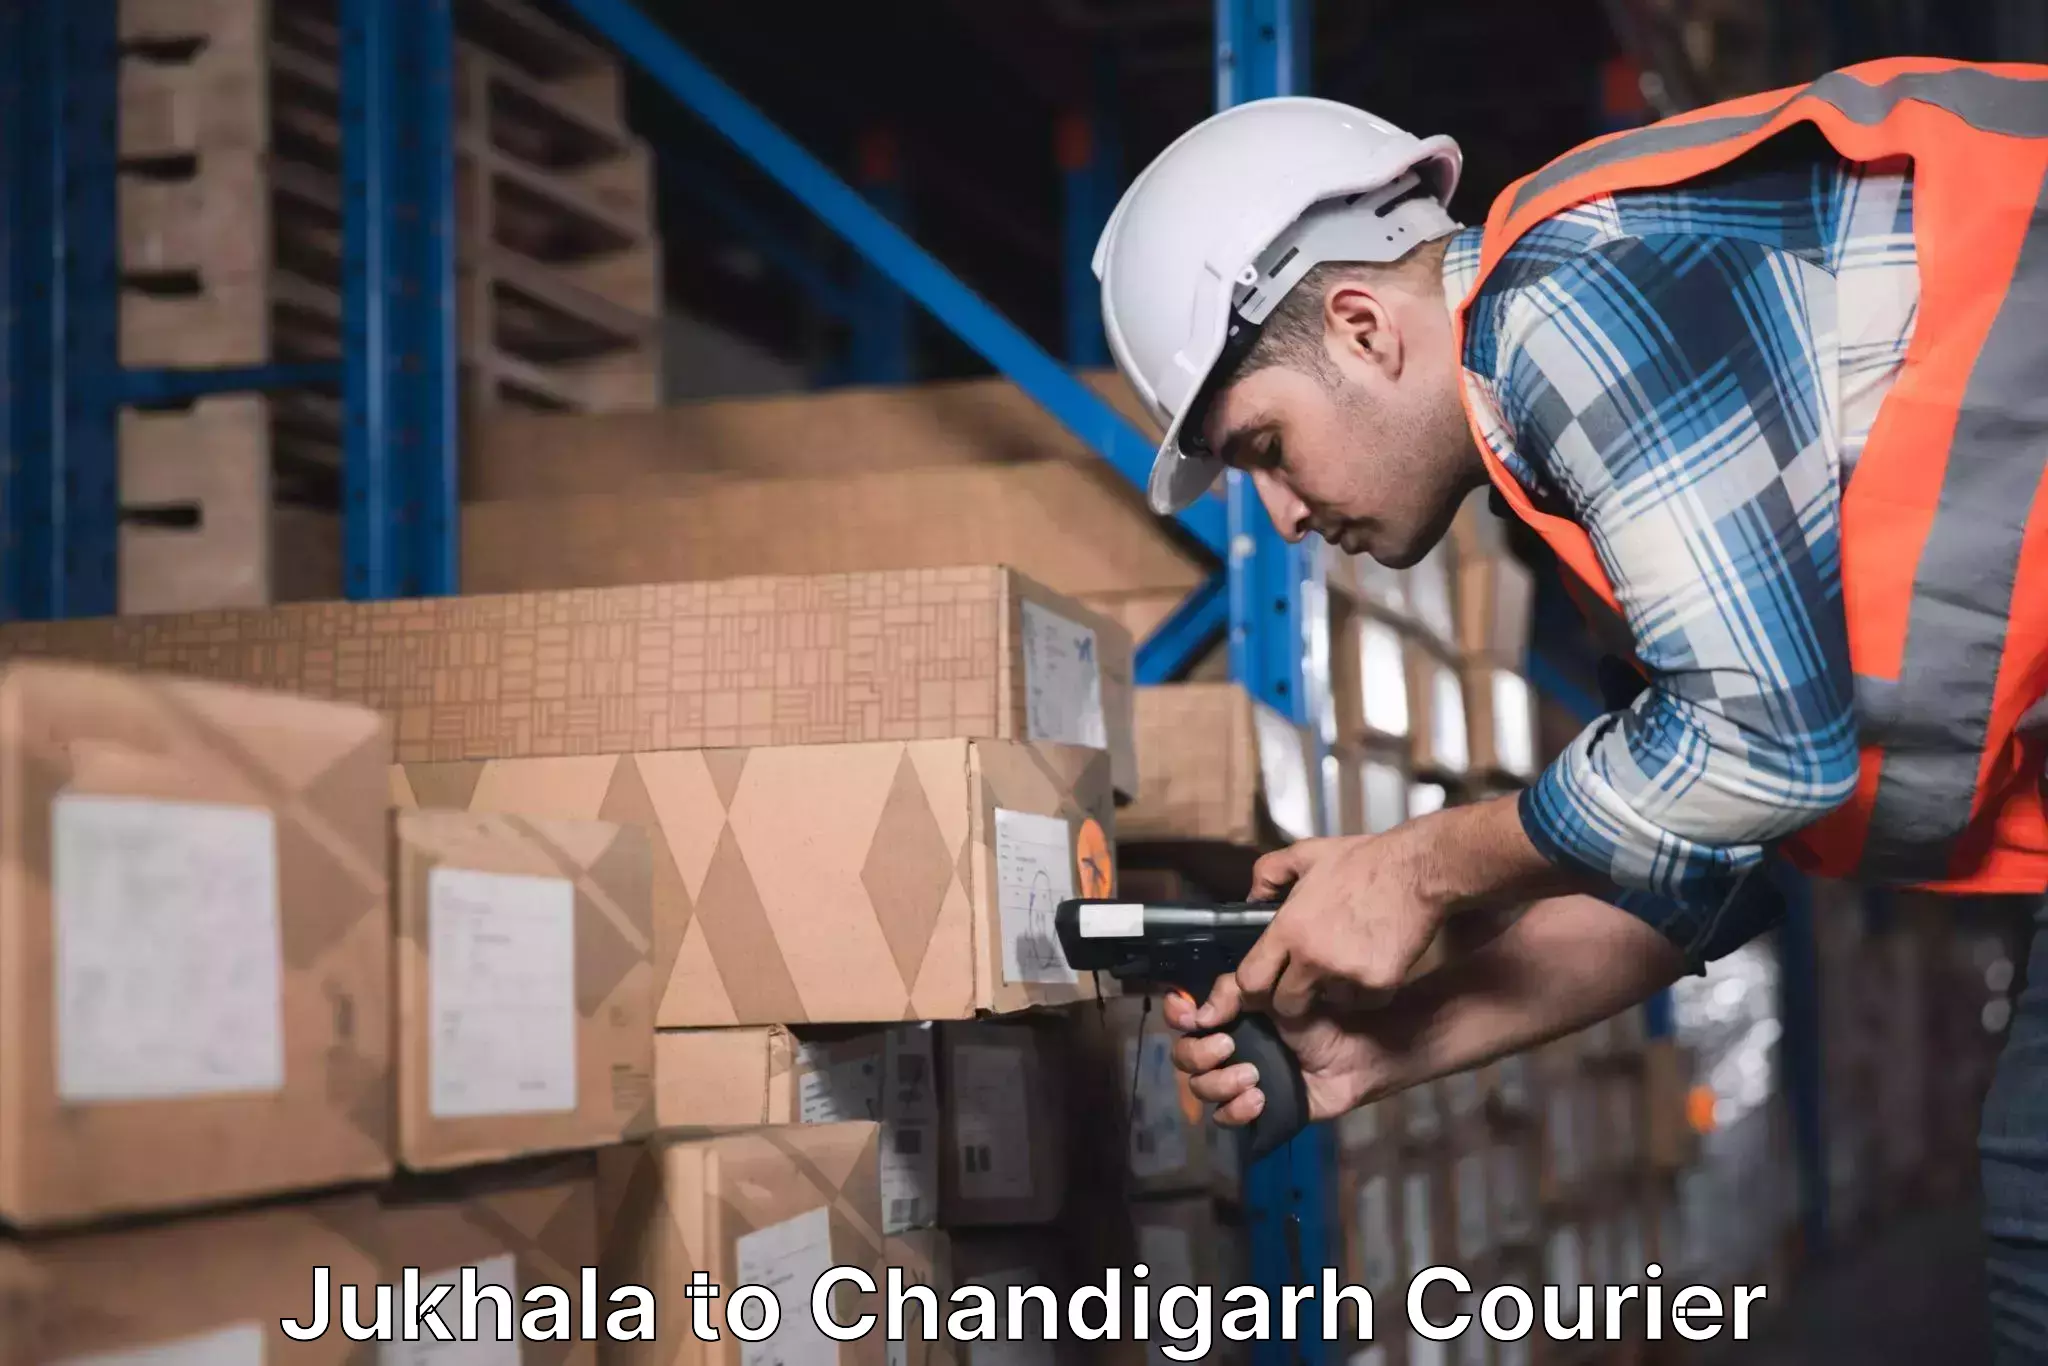 Nationwide delivery network Jukhala to Chandigarh